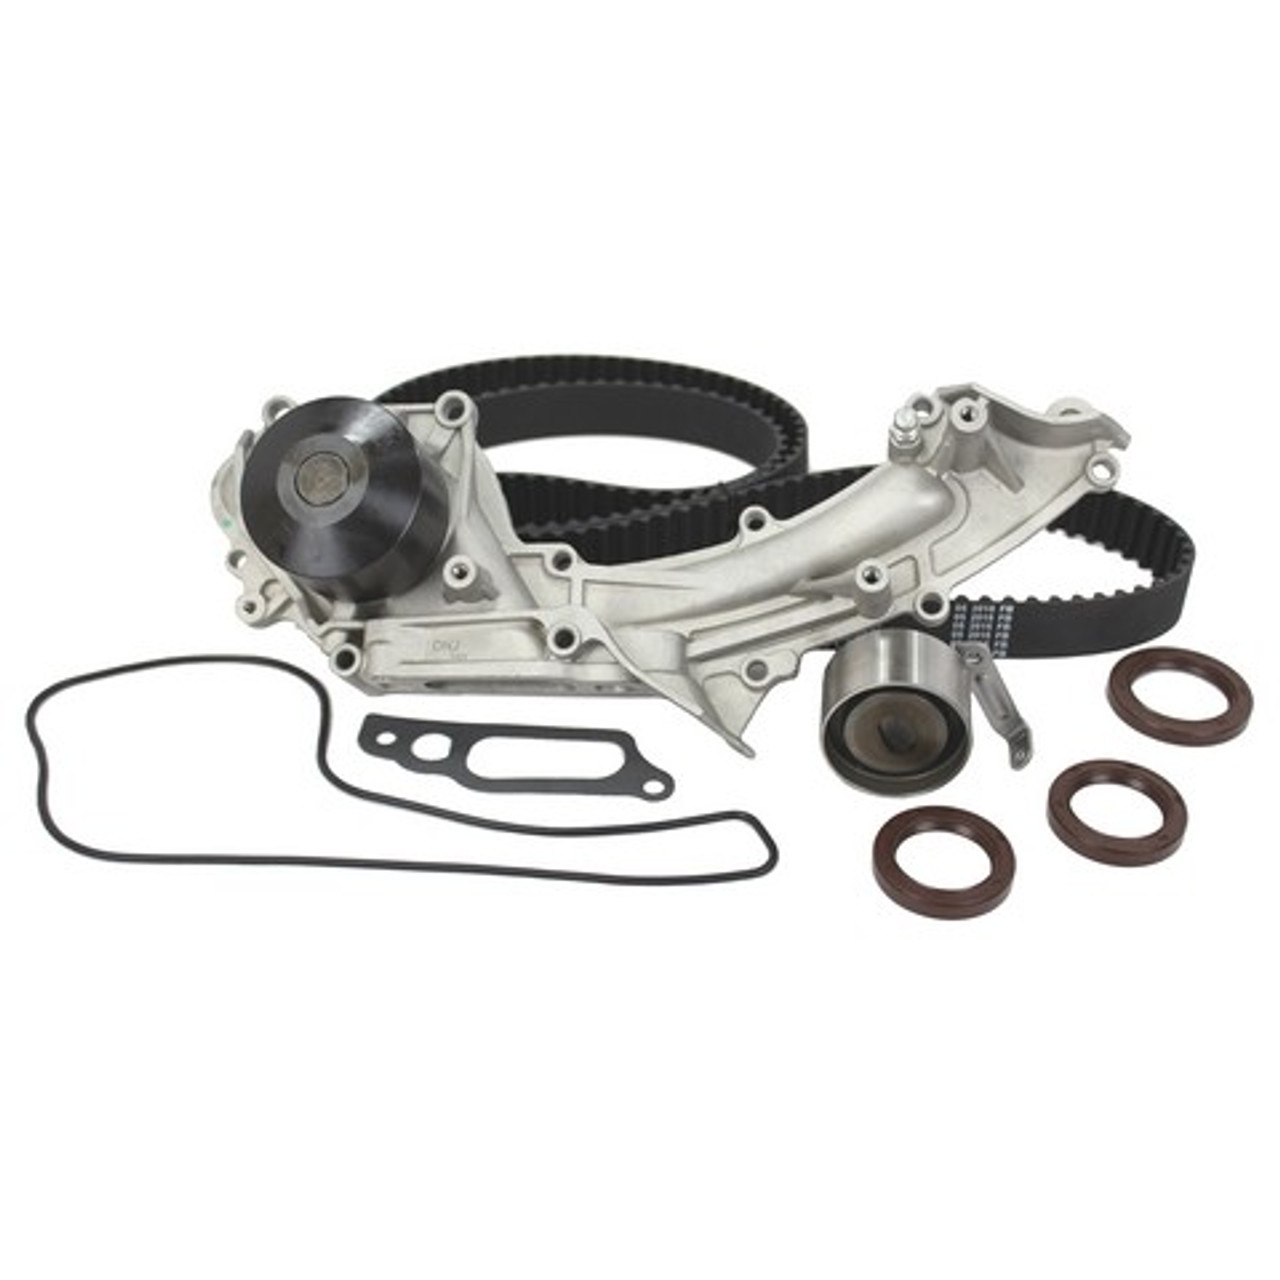 Timing Belt Kit with Water Pump 3.2L 1998 Acura TL - TBK282BWP.3